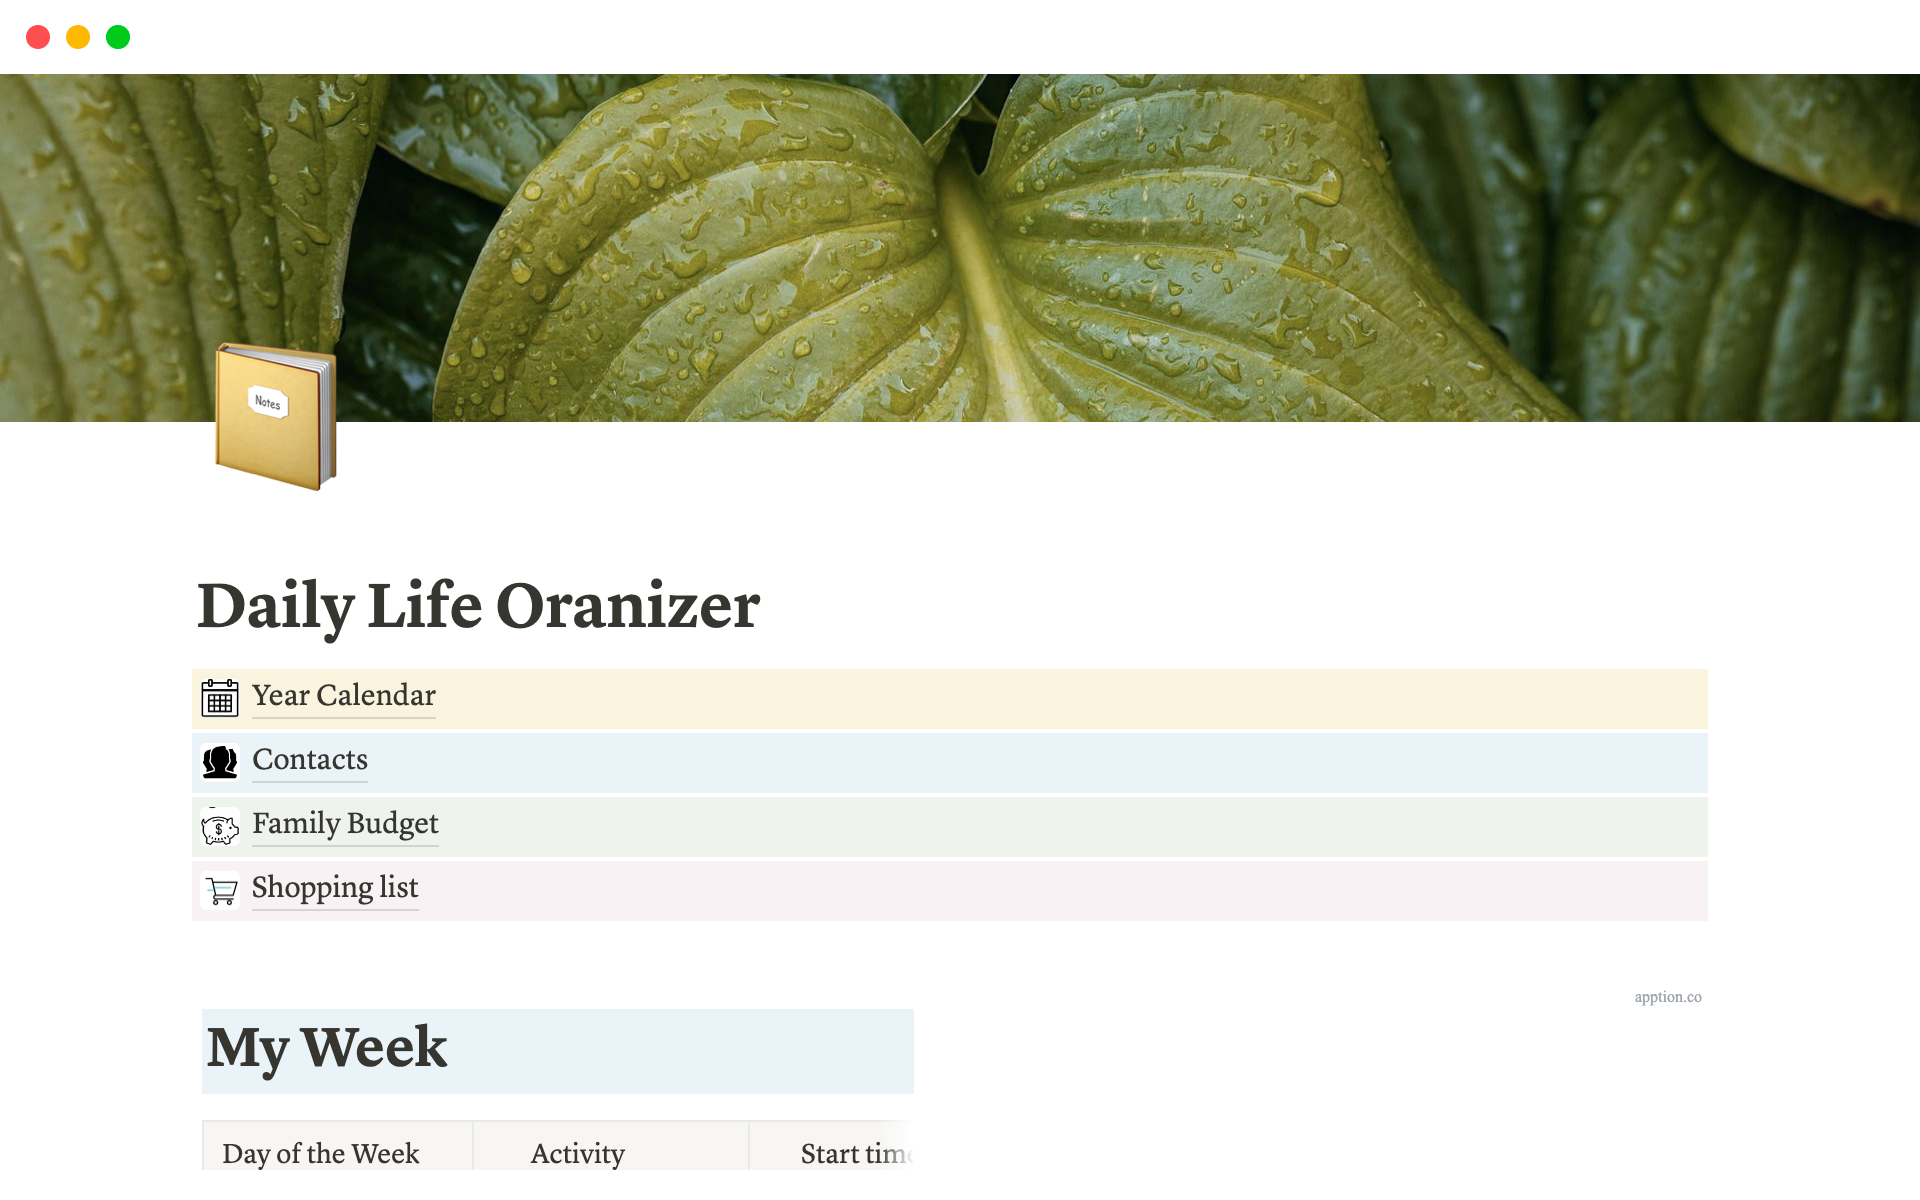 Helps people organize the day task, the simple way. Includes Family budget and personal contacts sections.